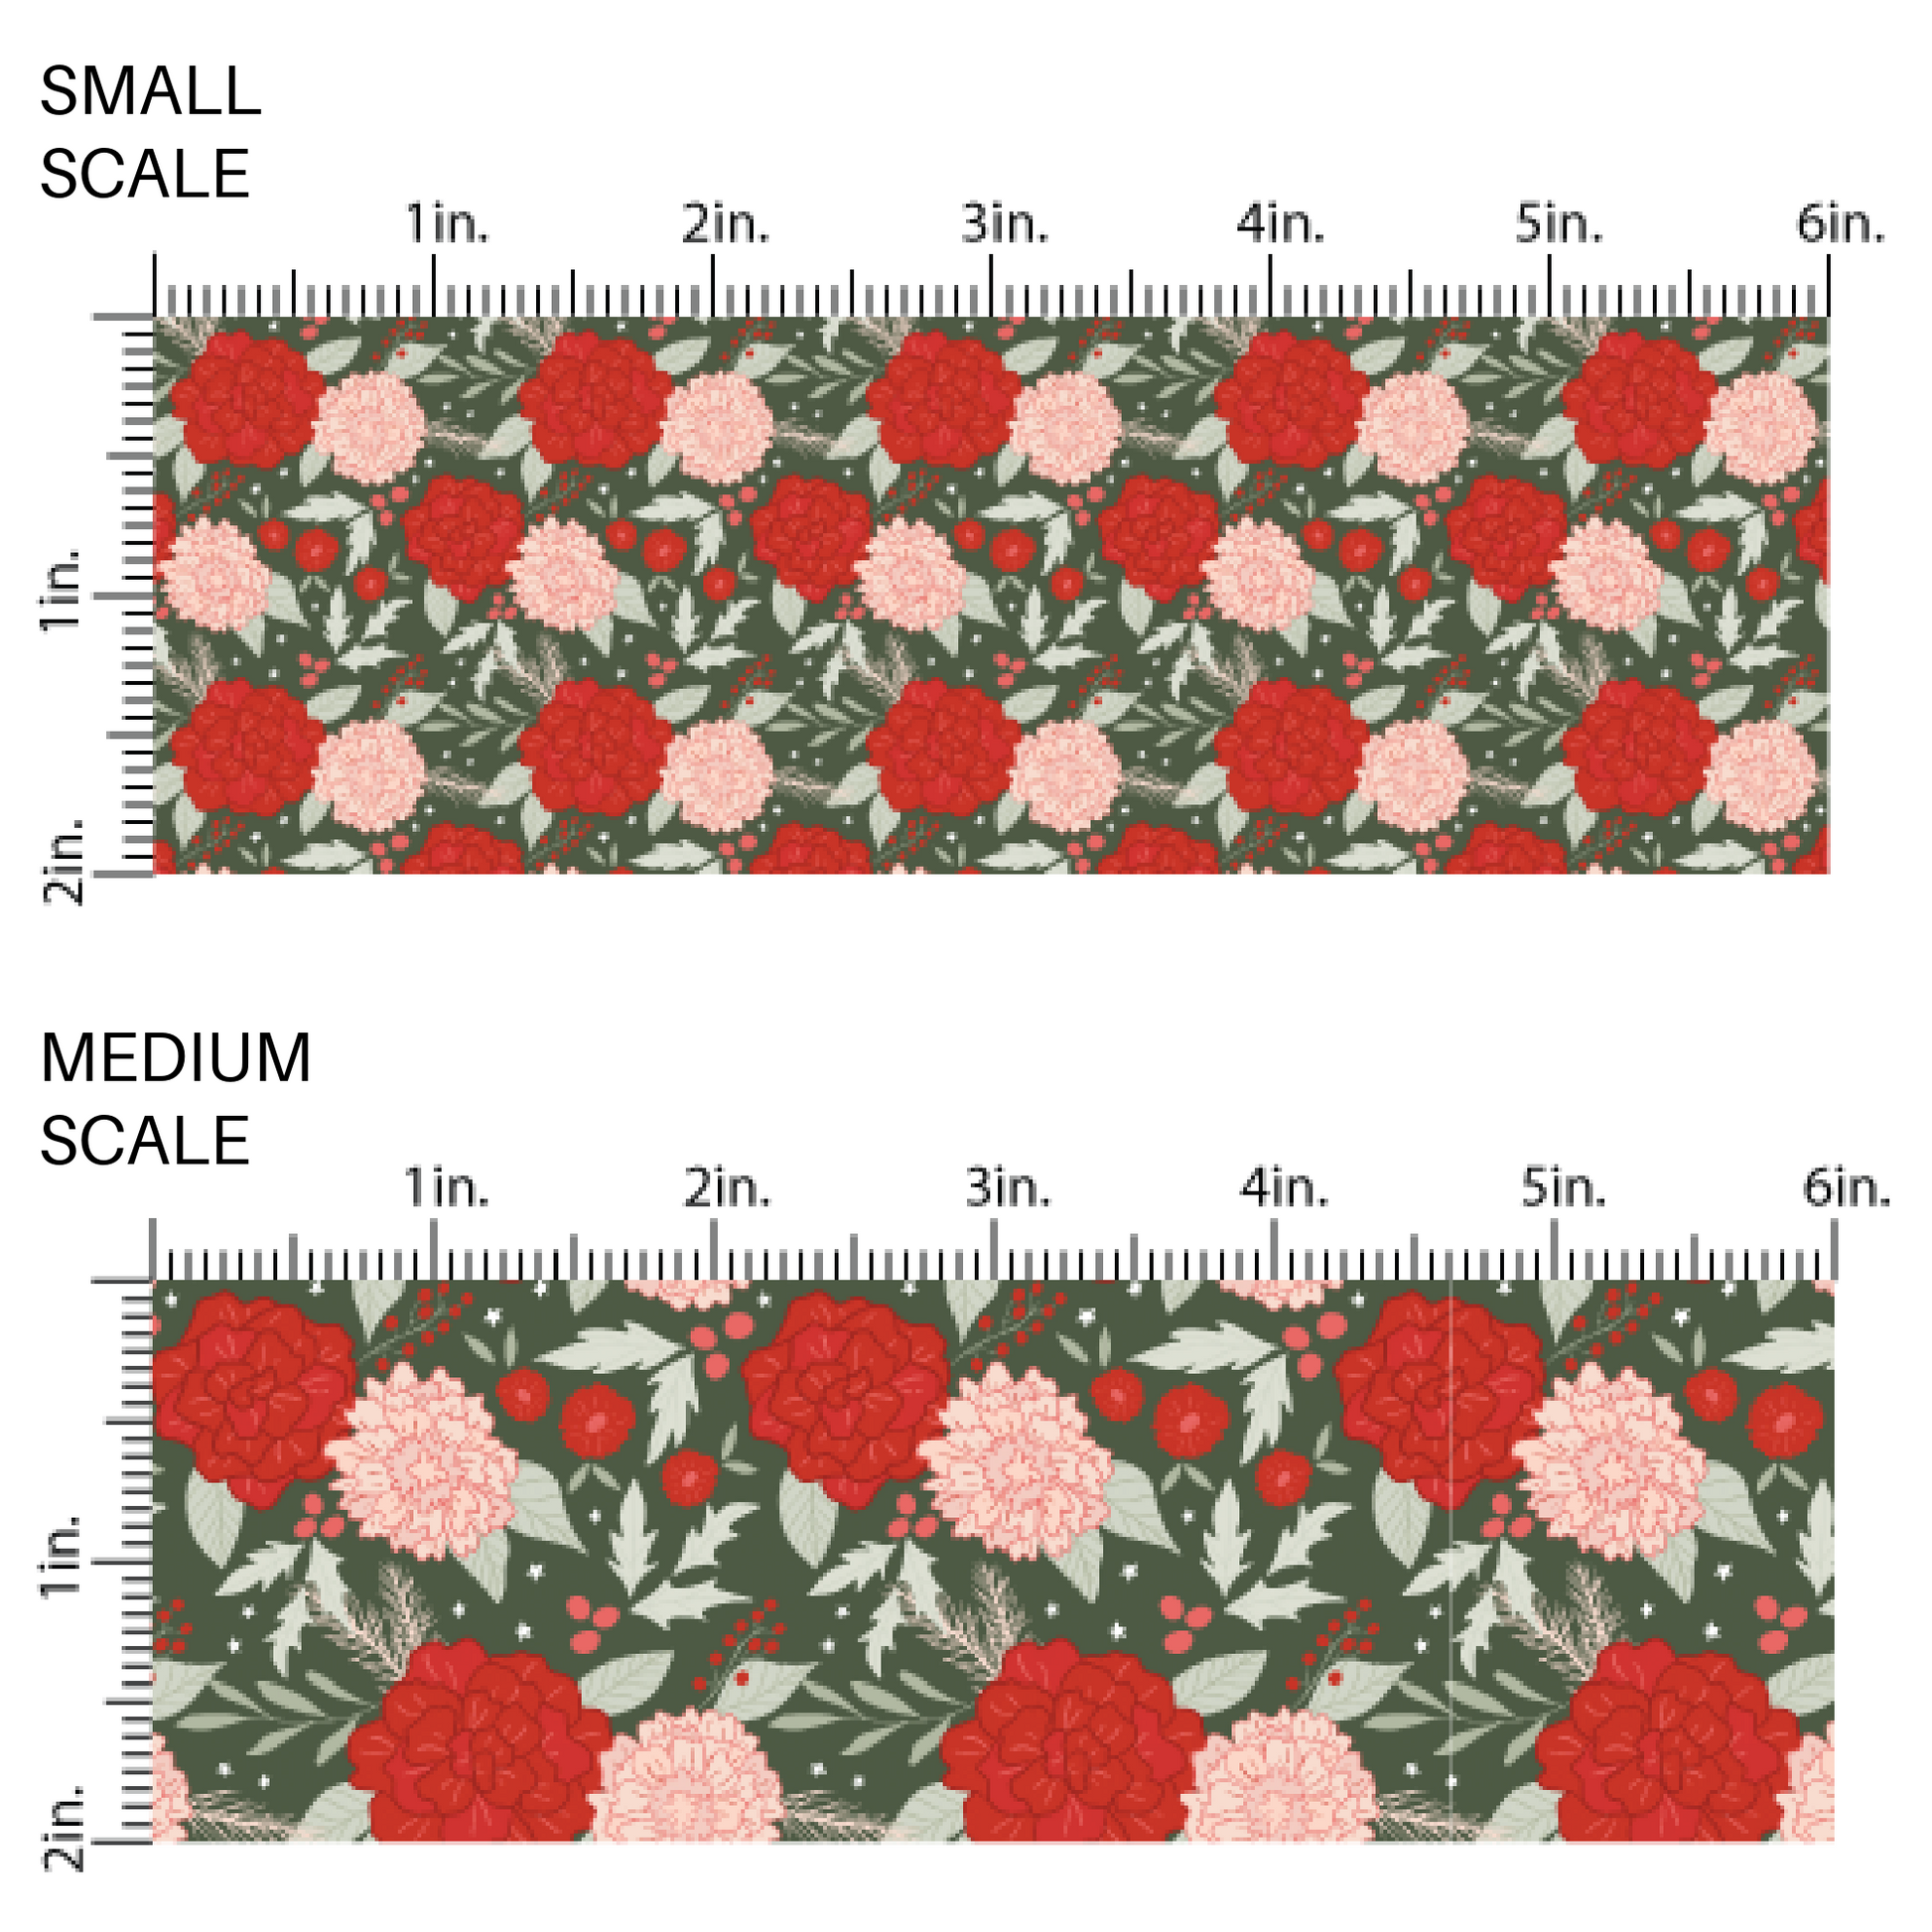 Red and green flowers and plaid pattern high quality fabric adaptable for all your crafting needs. Make cute baby headwraps, fun girl hairbows, knotted headbands for adults or kids, clothing, and more!